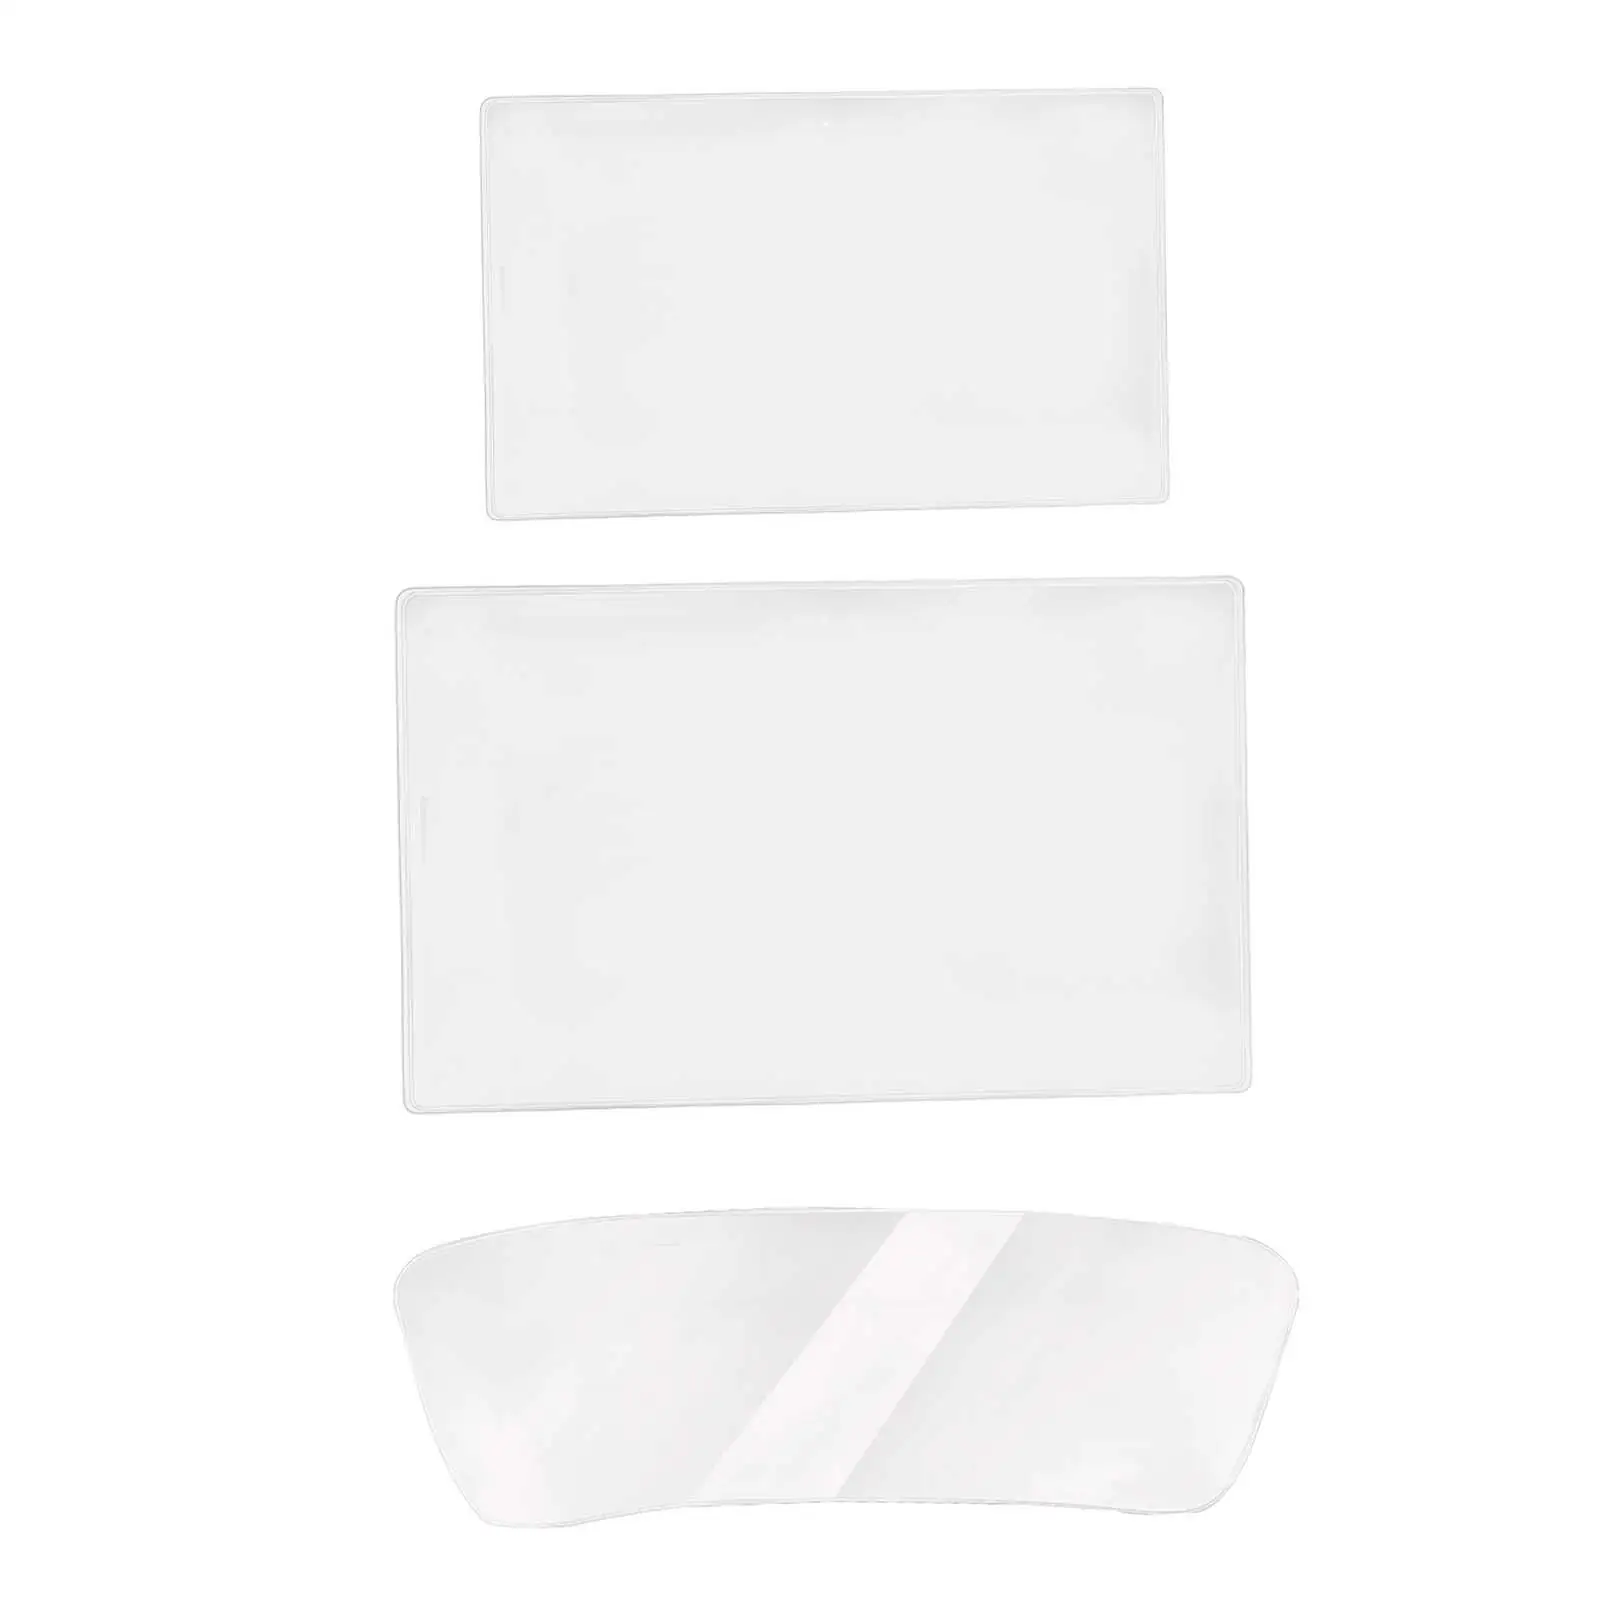 Car Screen Protector Film Interior Accessories for Byd Song Plus Dm-I 22 Central Control Navigation